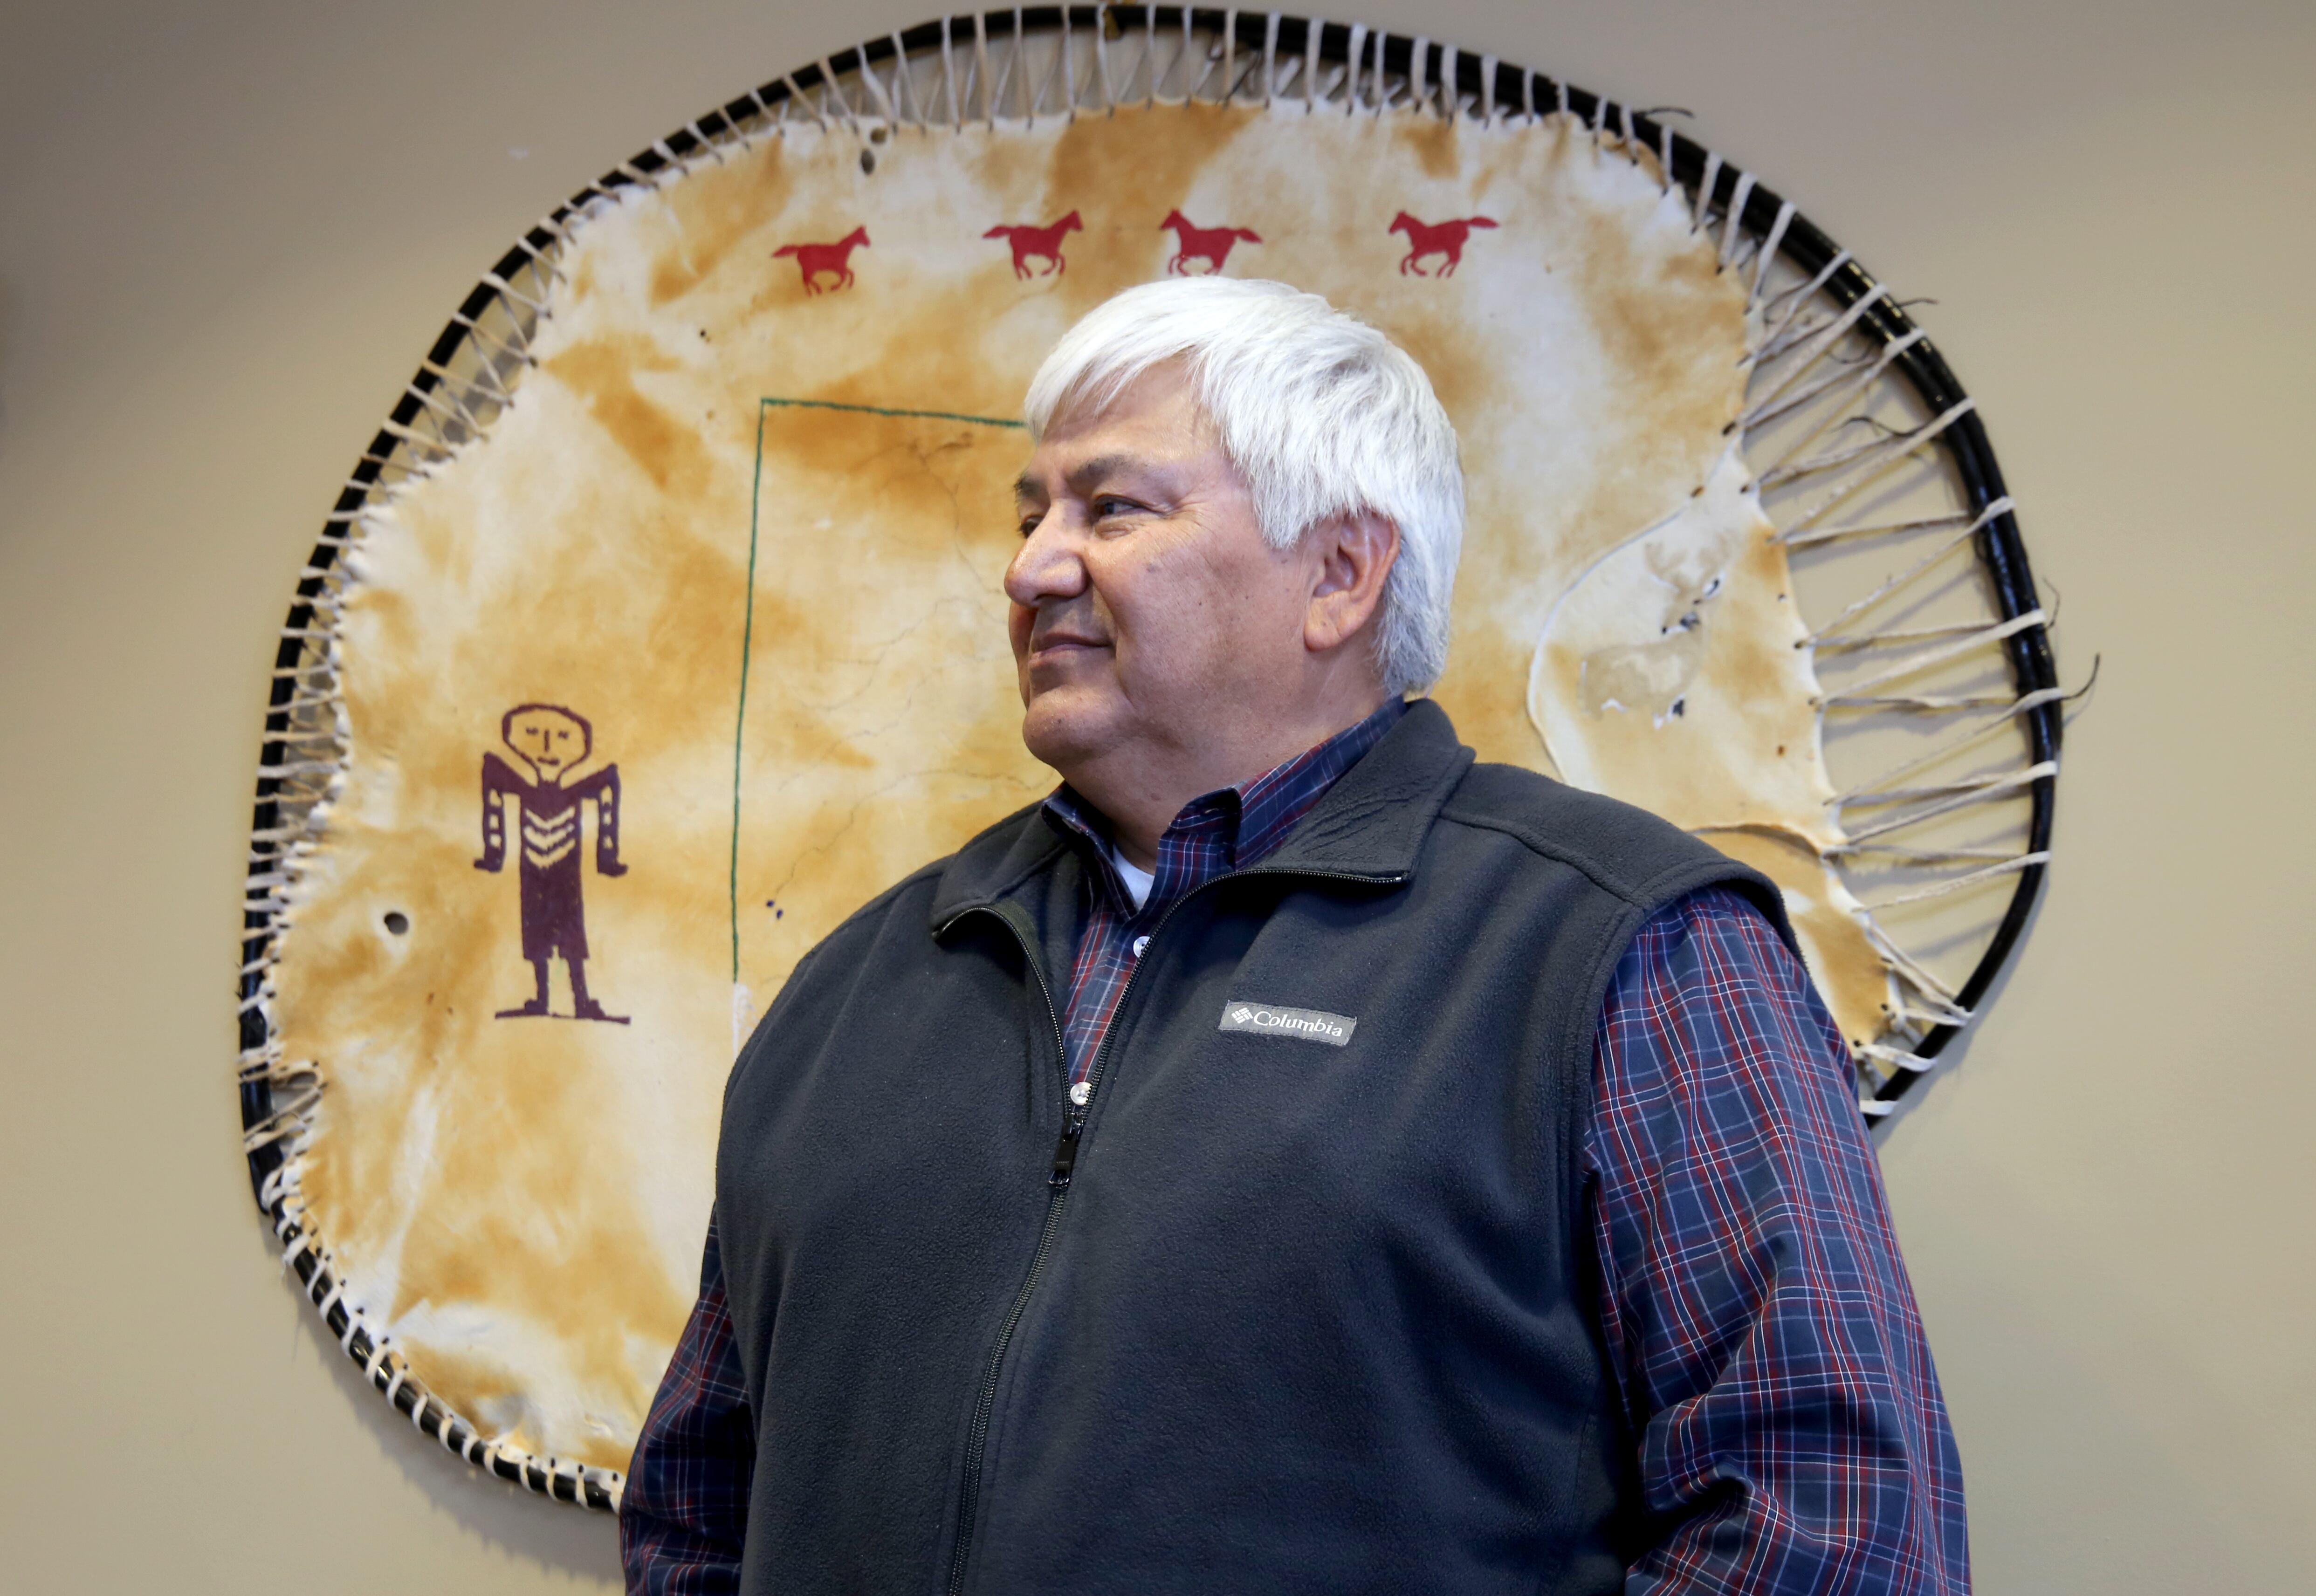 Confederated Tribes of Warm Springs CEO Robert 